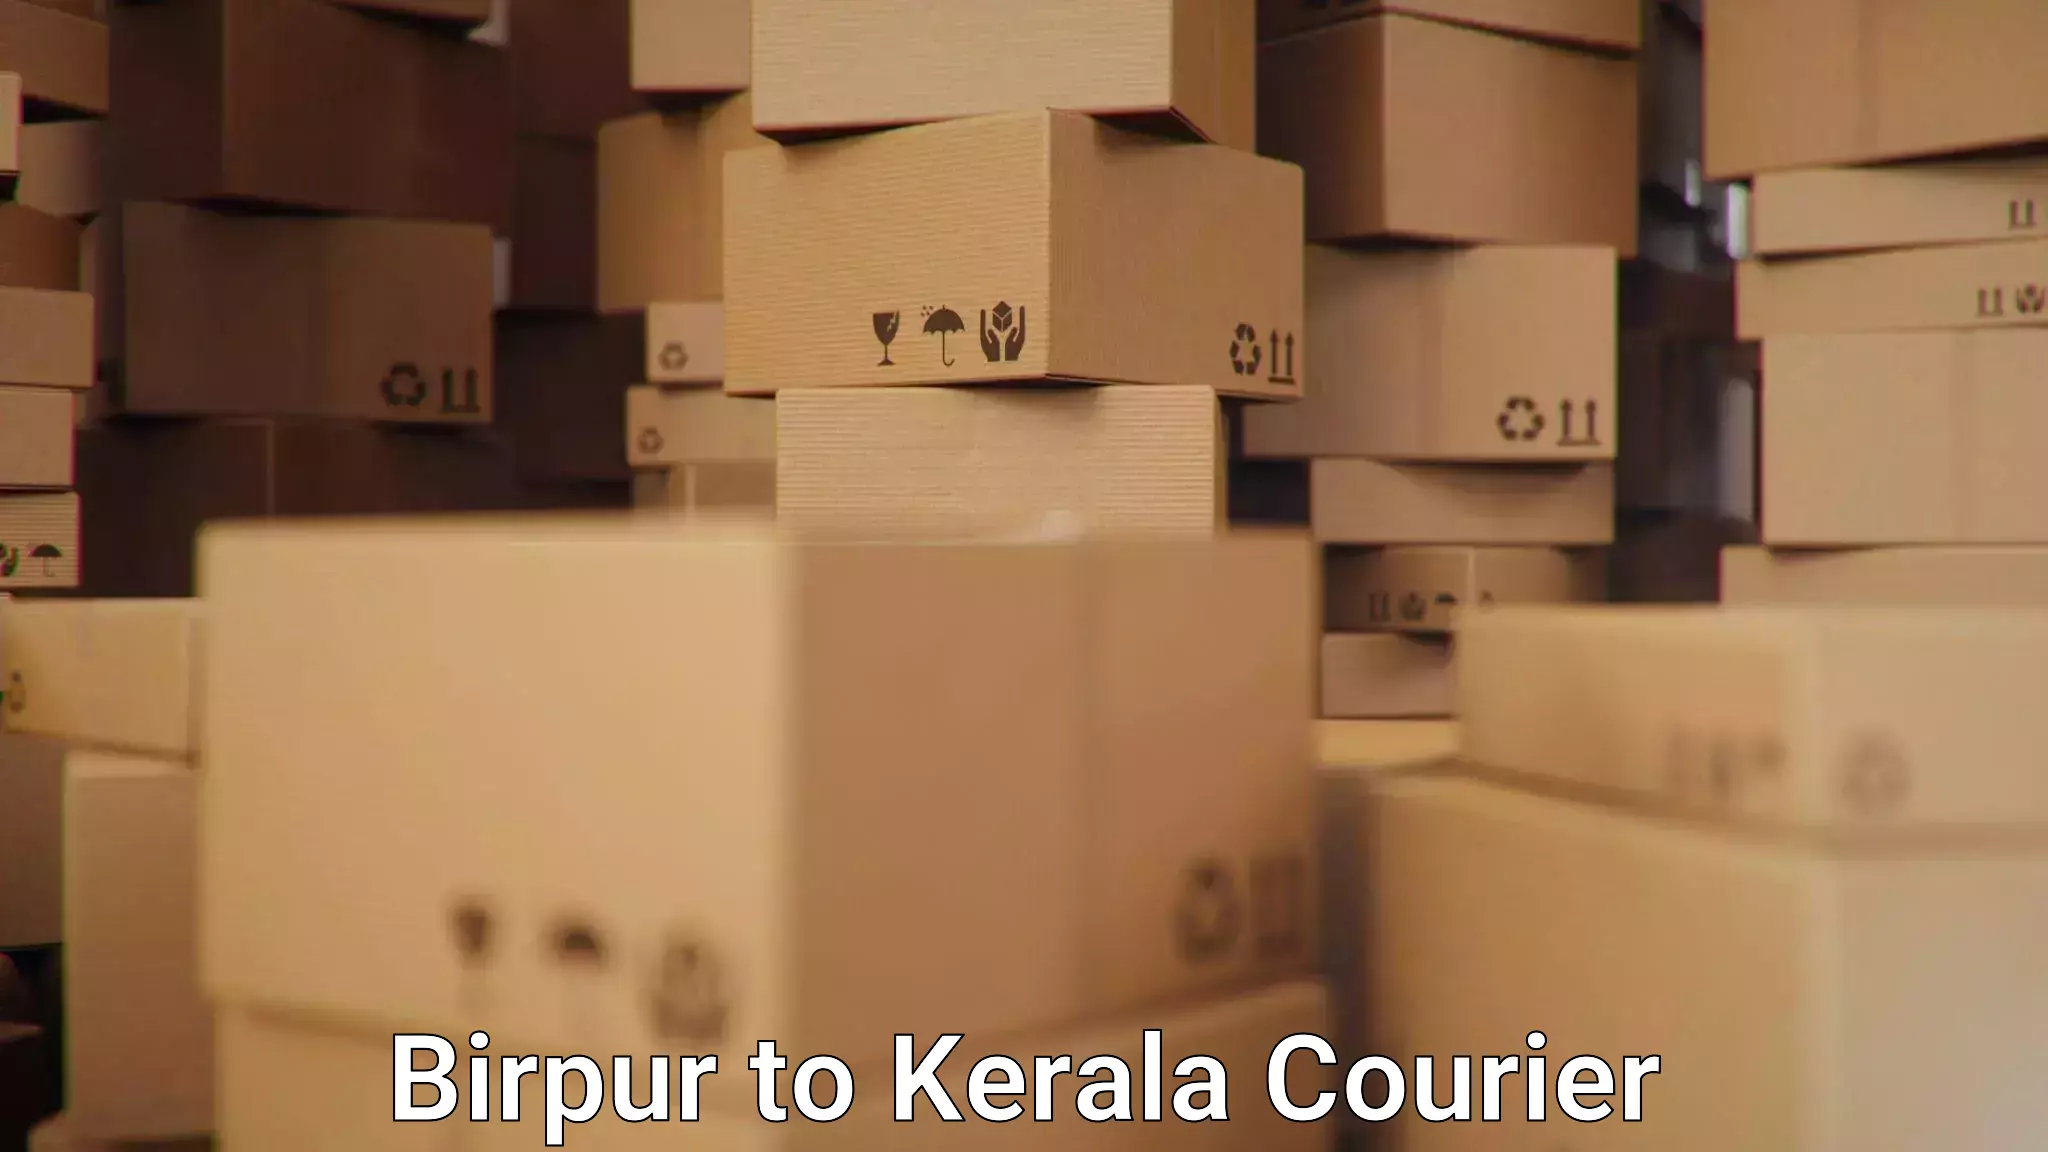 Courier app in Birpur to Kottayam